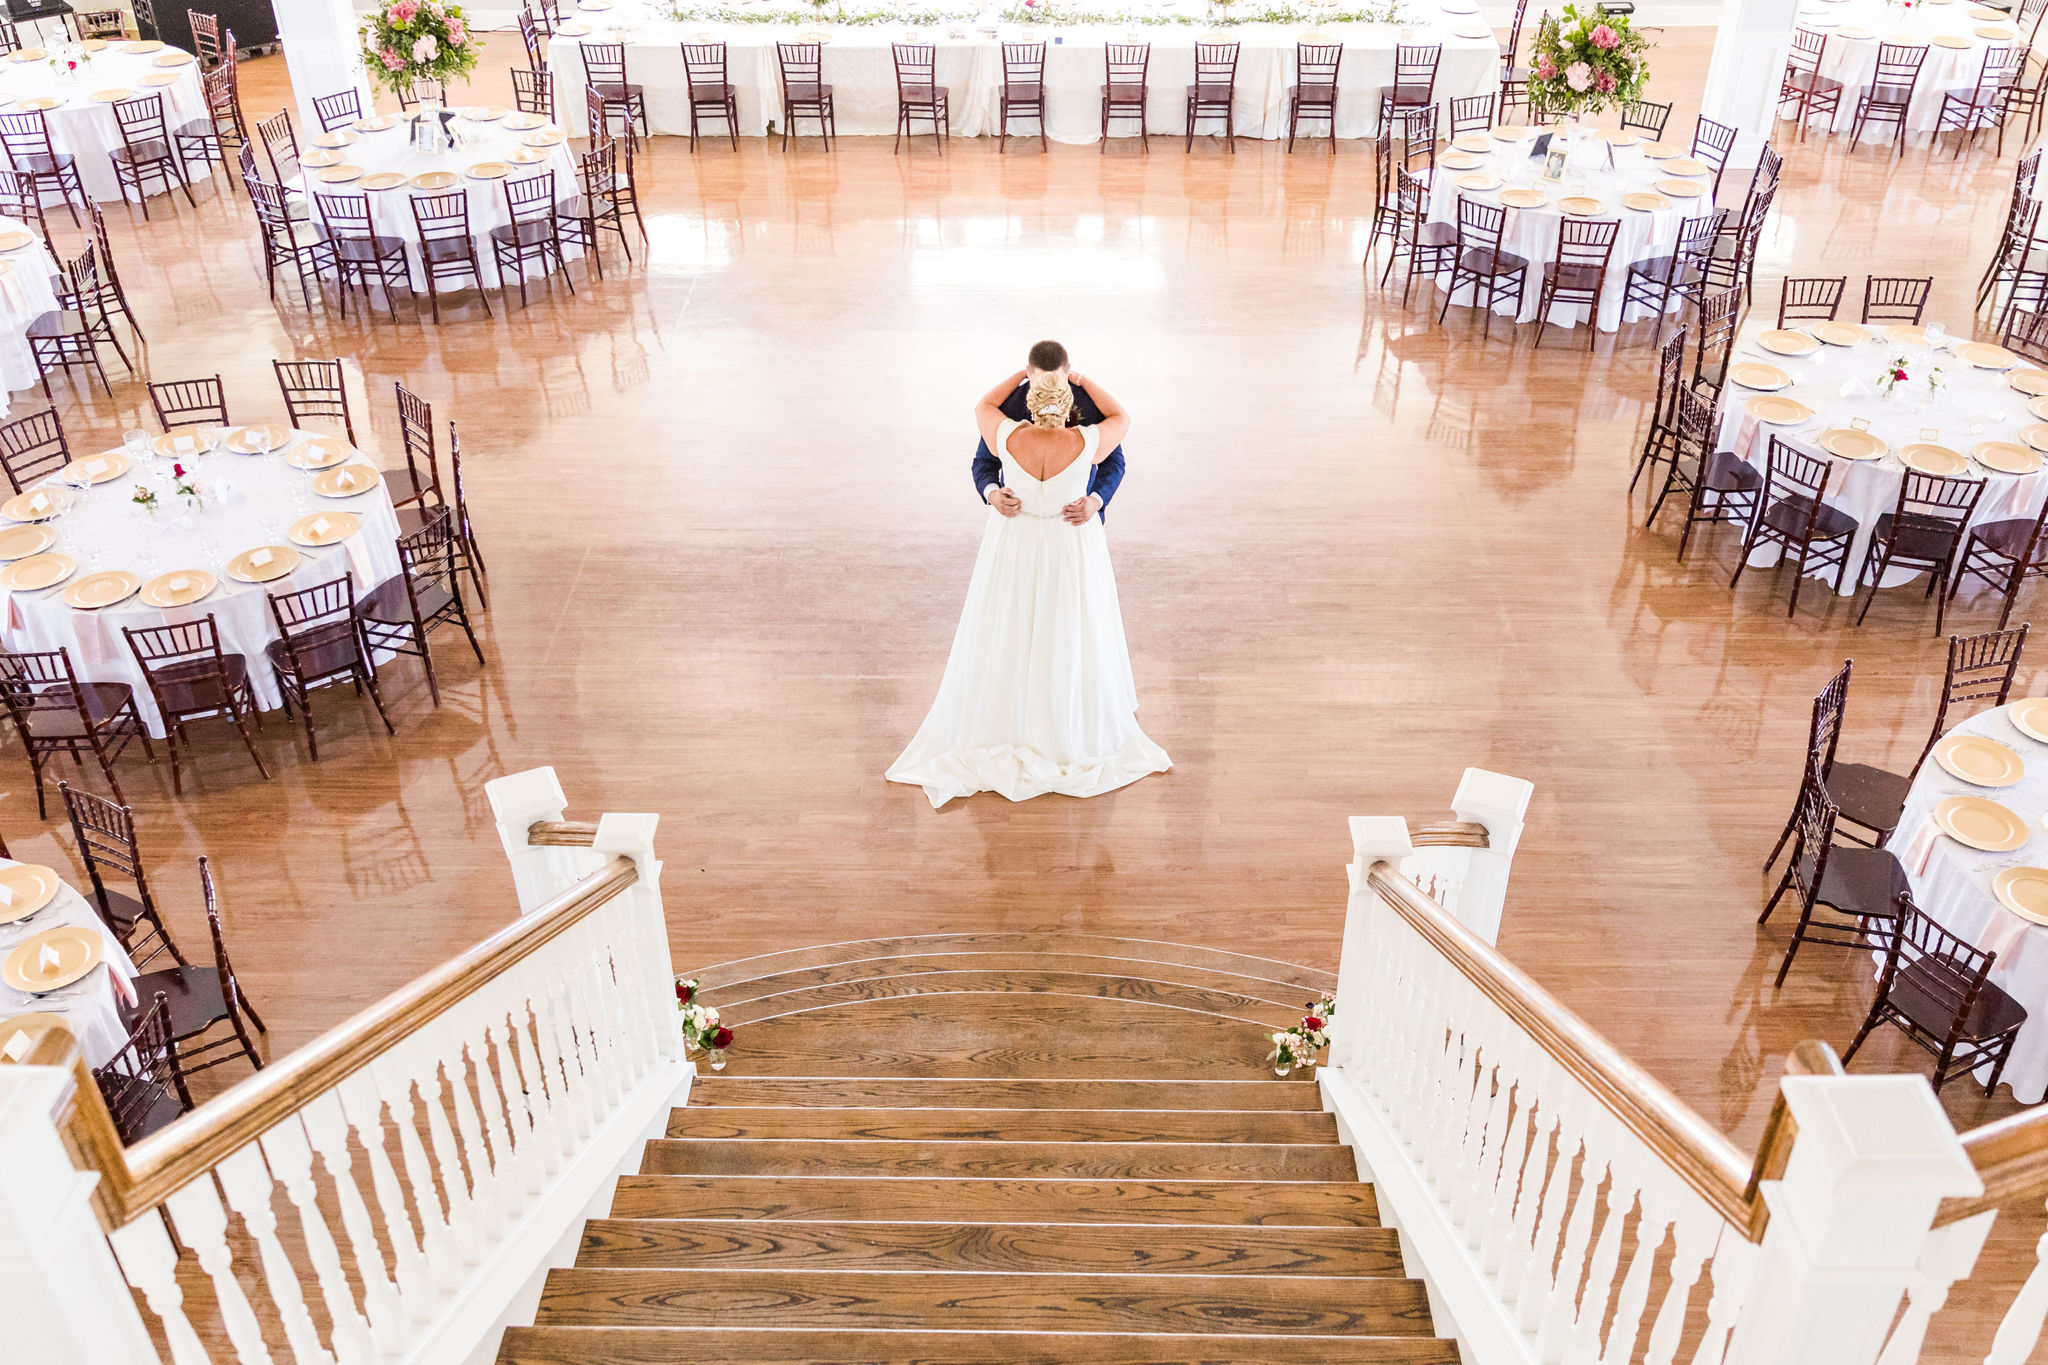 Katherine and Travis share a first dance at Kendall Point